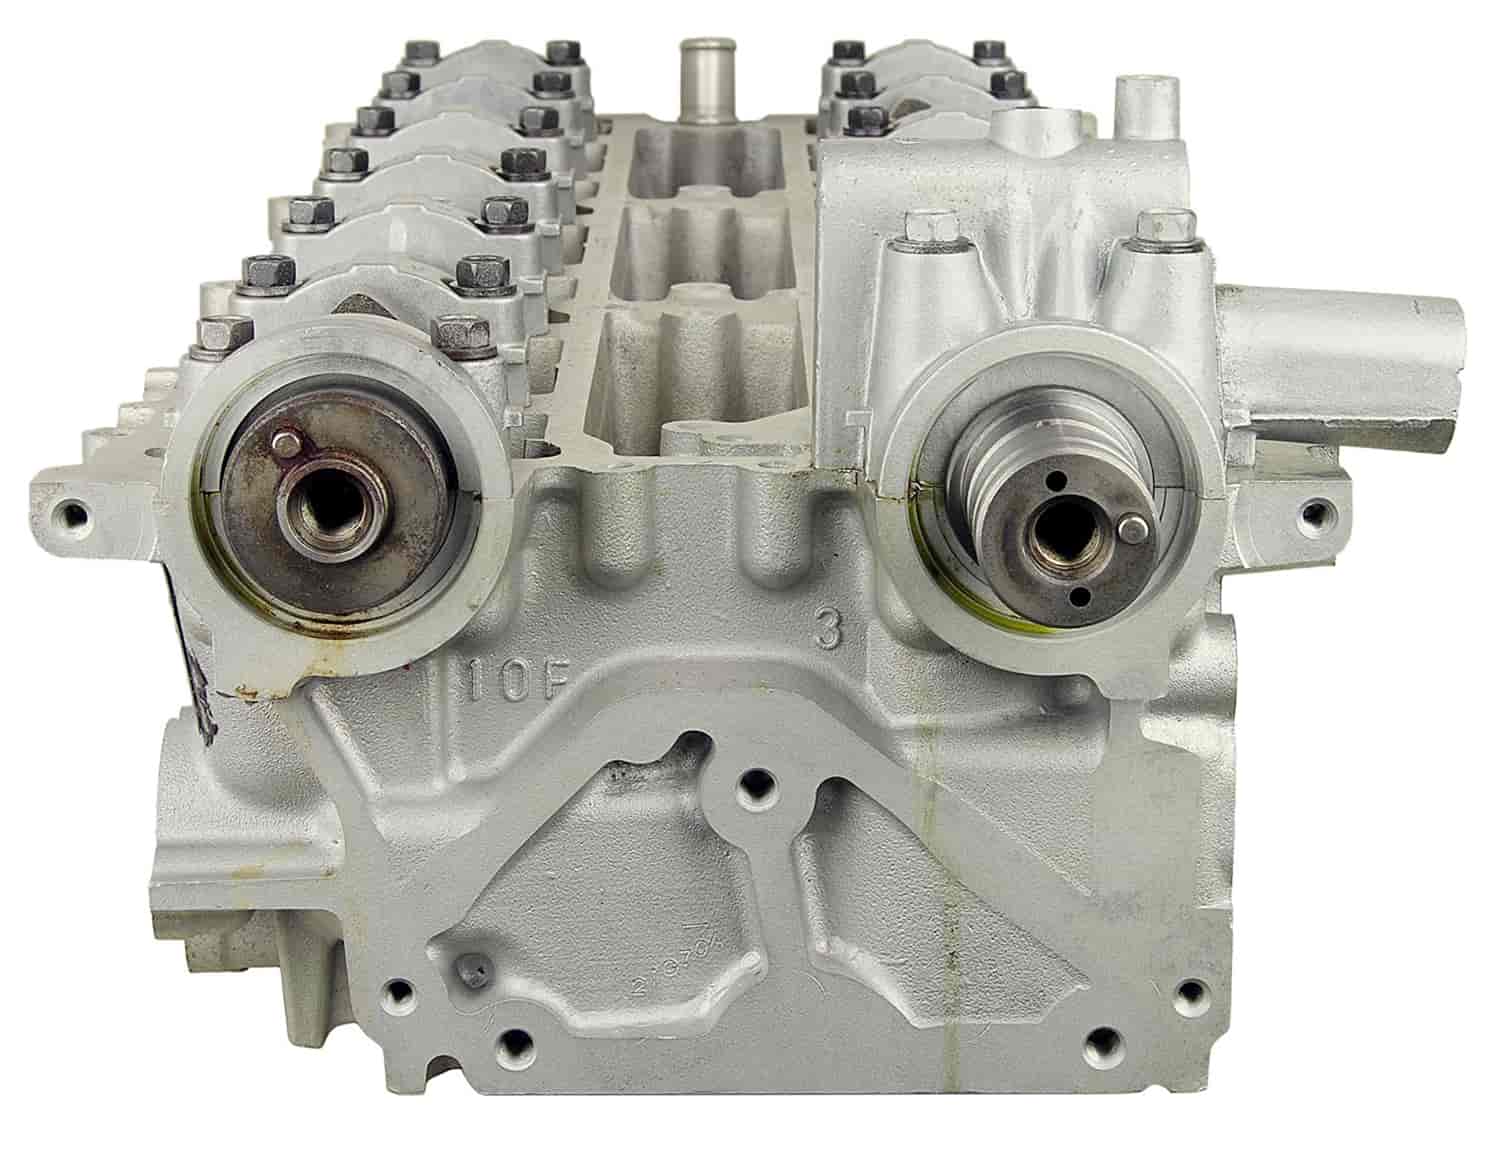 Remanufactured Cylinder Head for 1997-2005 Toyota/Lexus with 3.0L